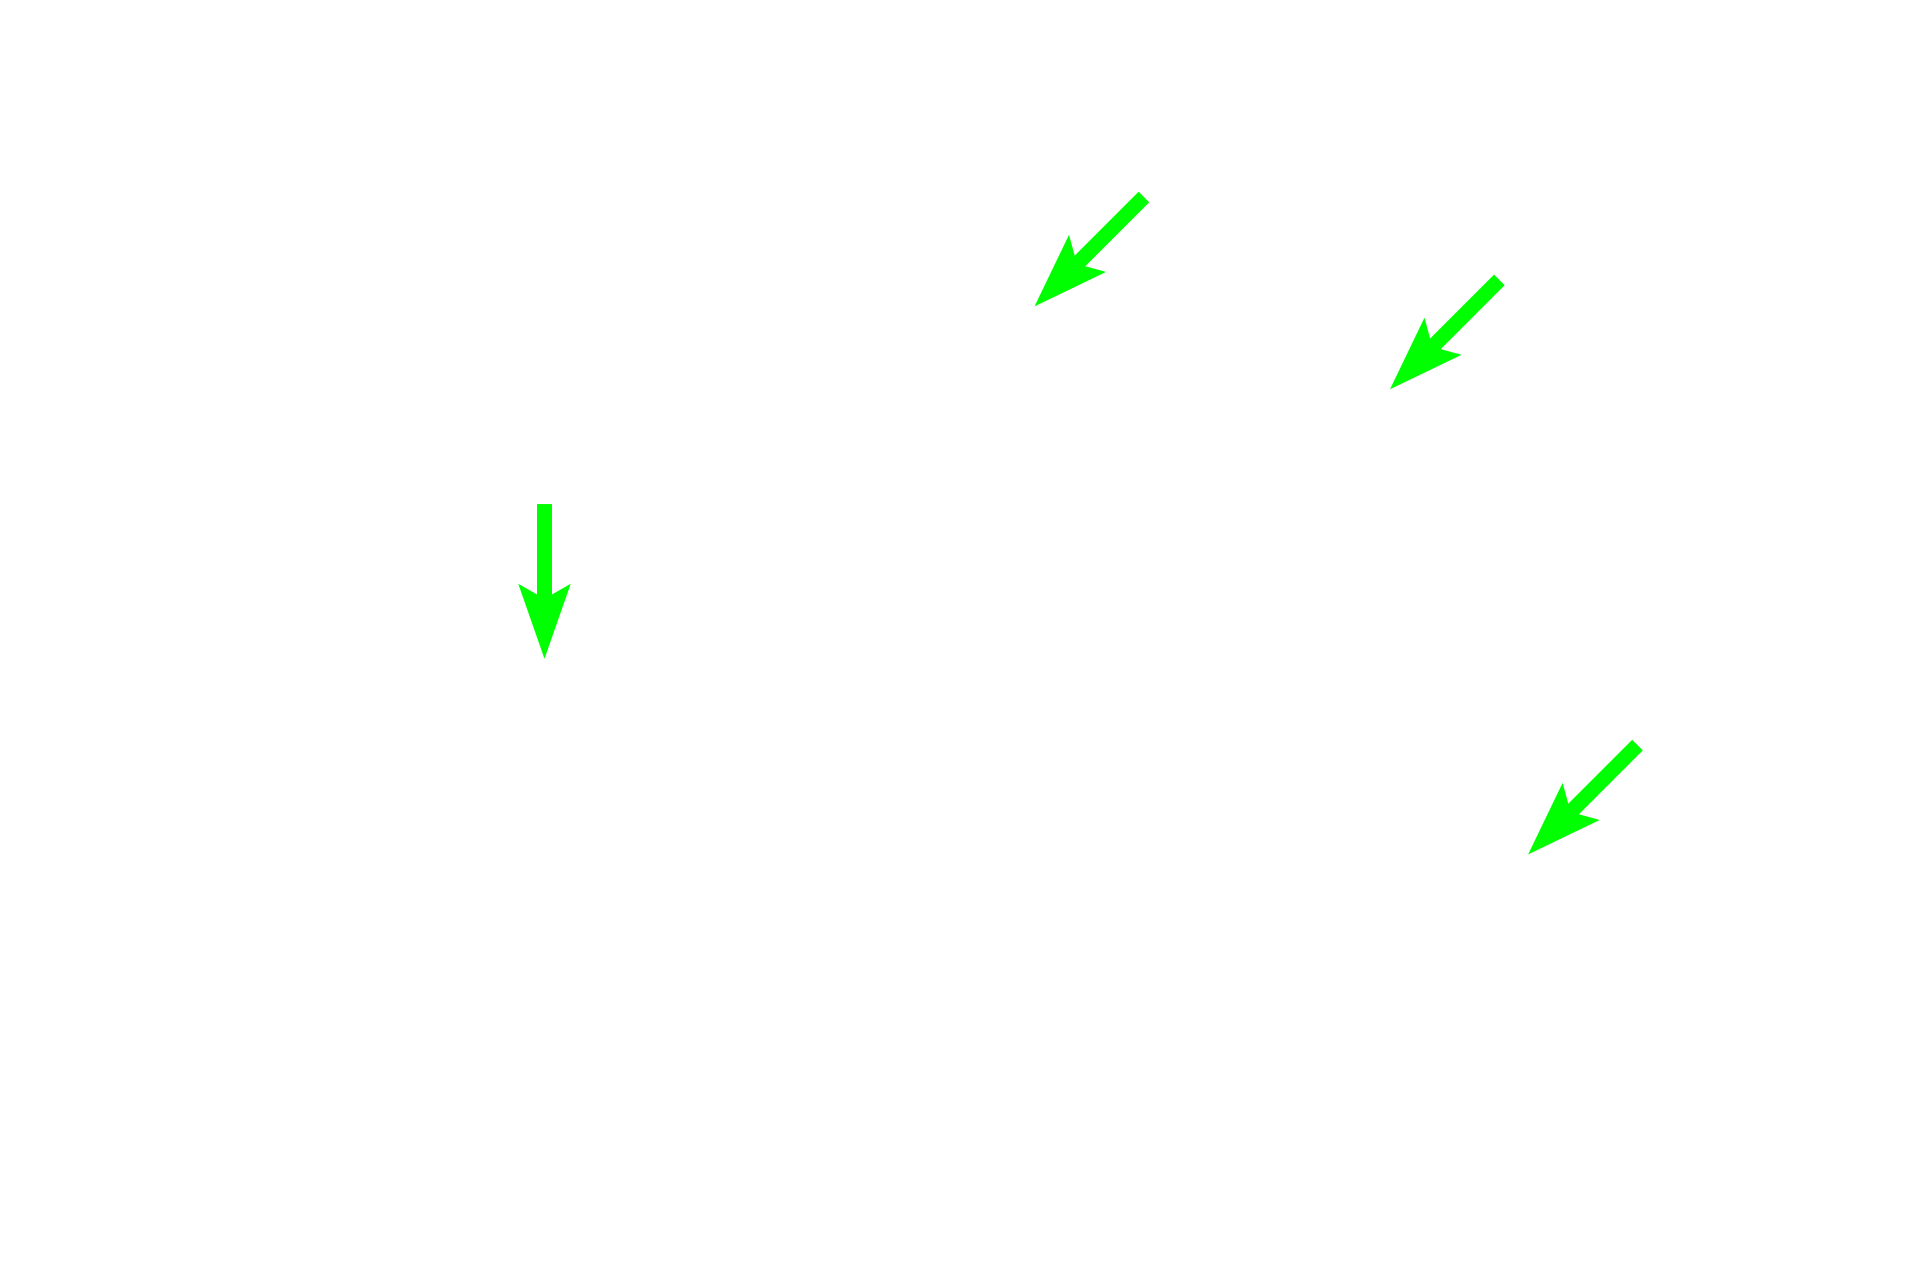 Axons <p>Contraction of skeletal muscle is initiated by depolarization of the sarcolemma at the neuromuscular junction (NMJ) or motor end plate, a specialized synapse between axon terminals and the sarcolemma beneath them. Here, several axons are terminating in neuromuscular junctions on skeletal muscle fibers. The motor neuron plus all the skeletal muscle fibers it innervates is a motor unit. 400x</p>
